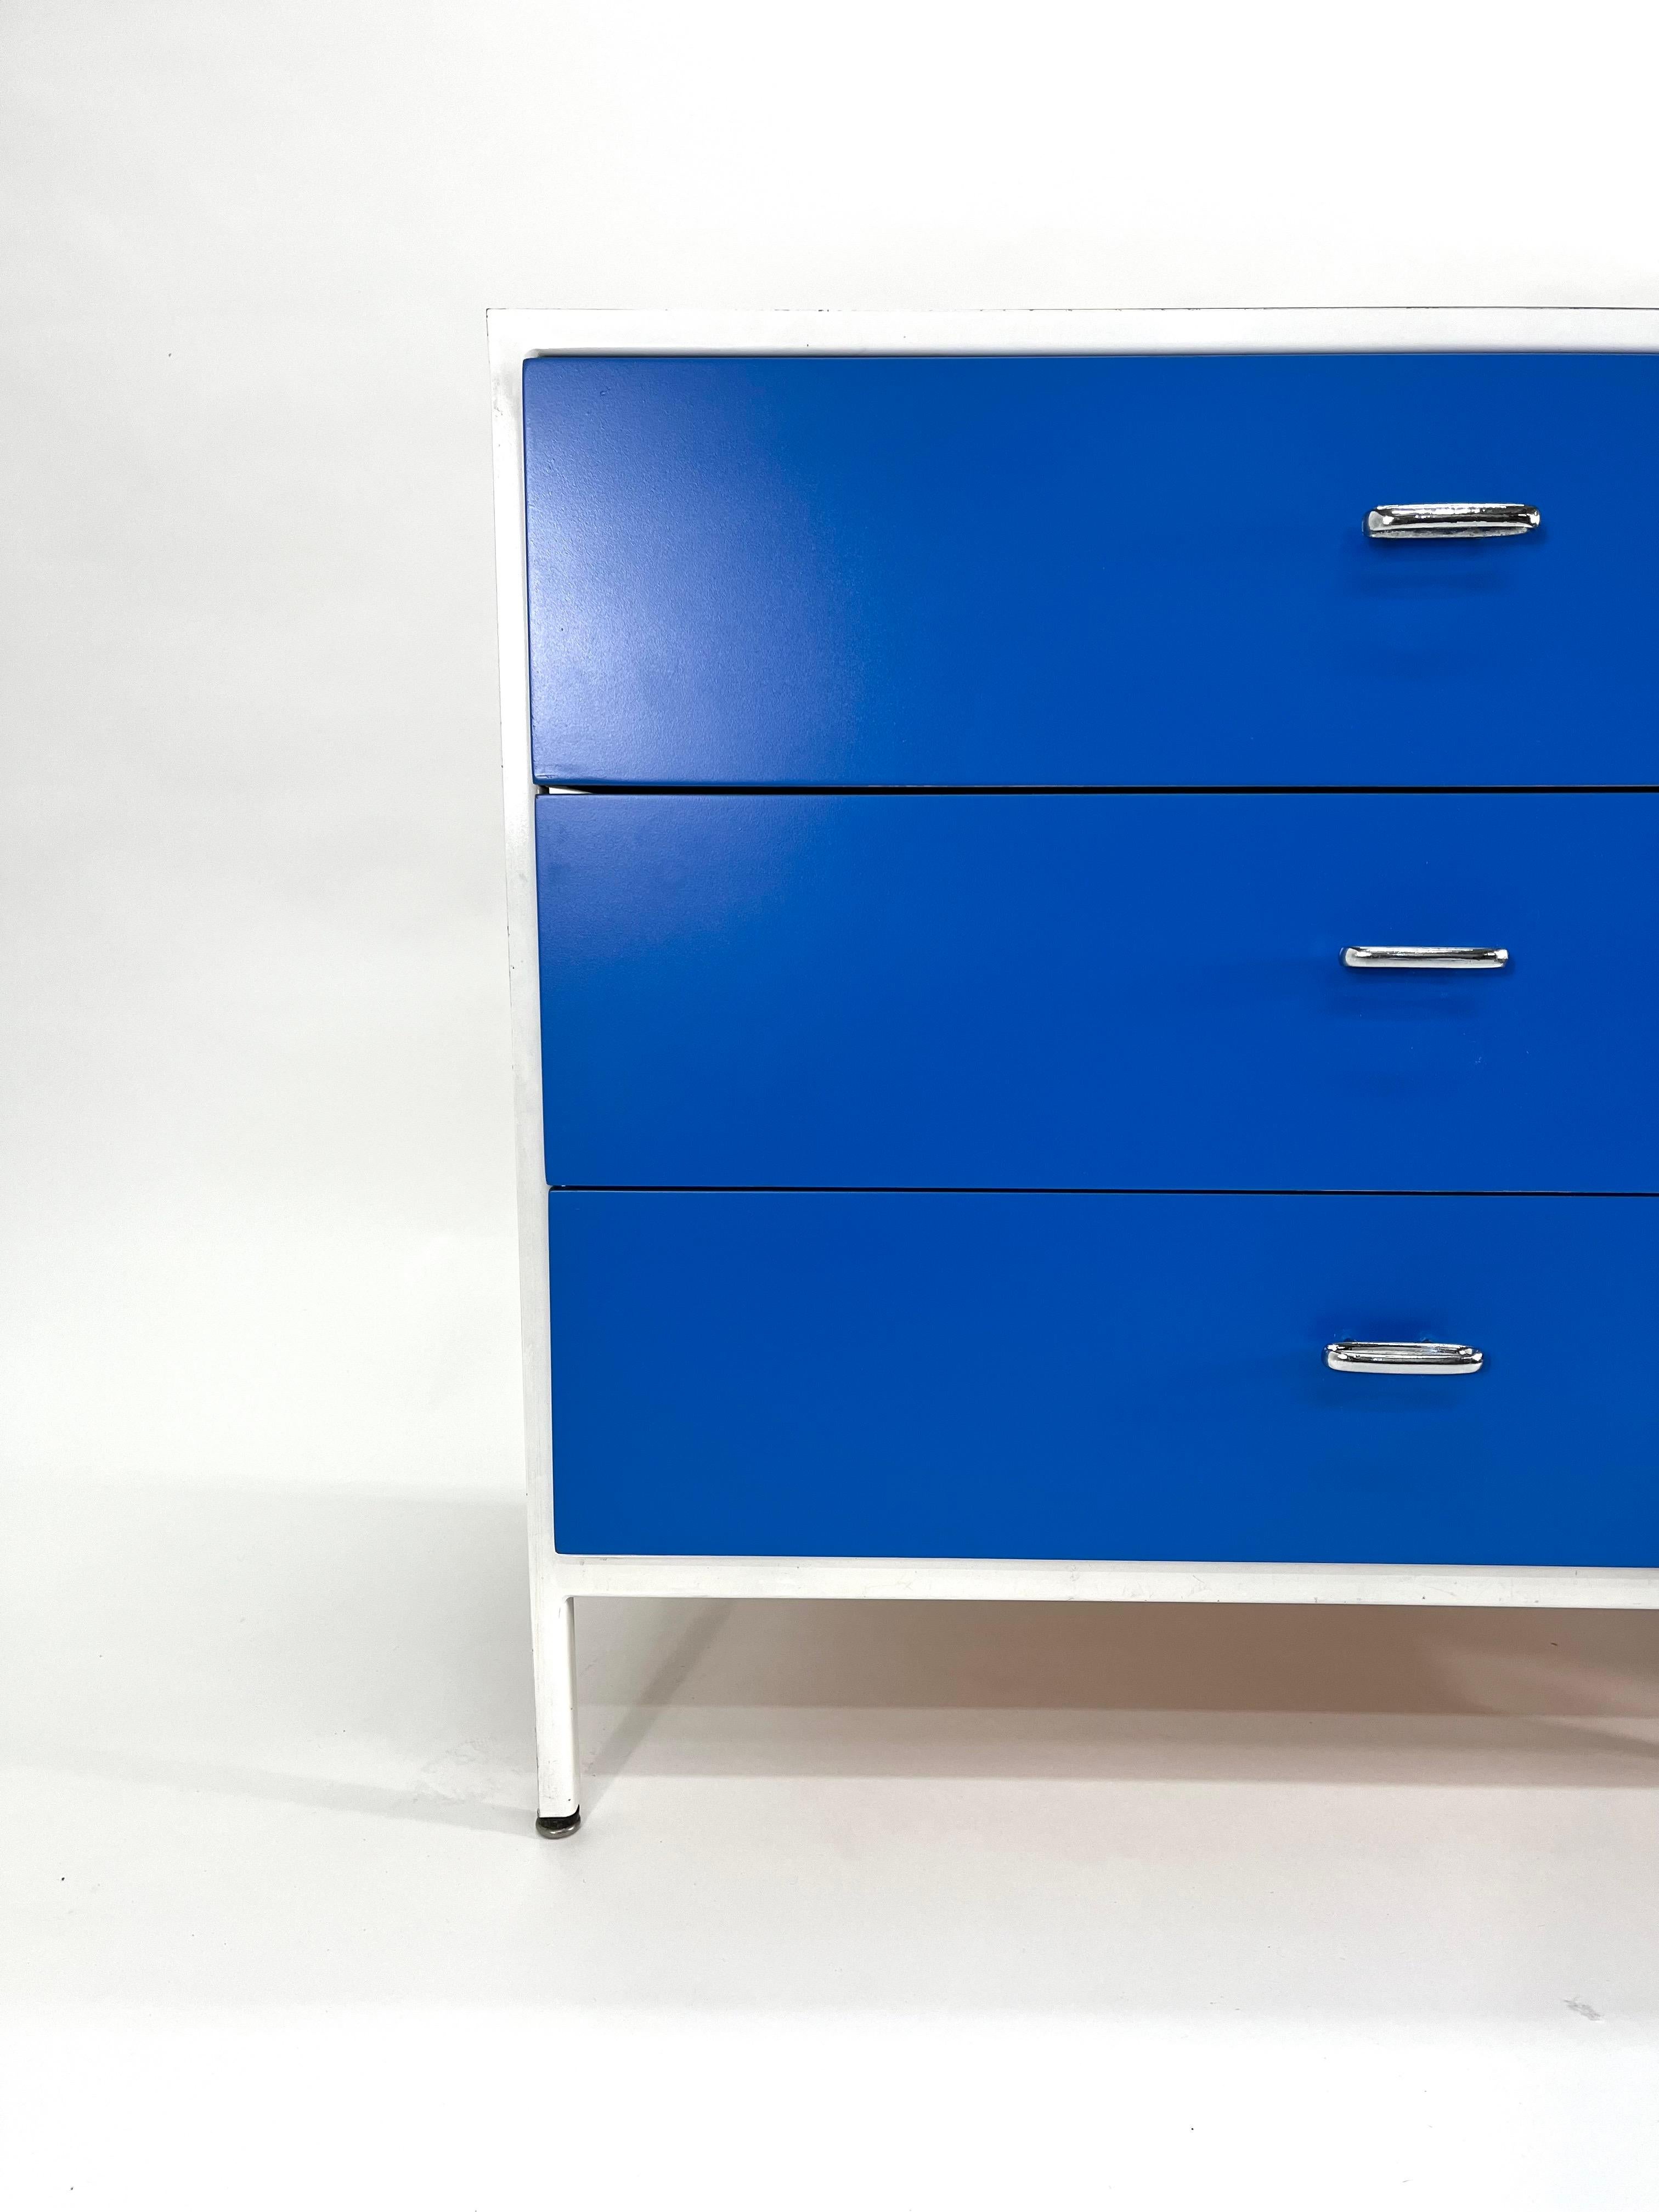 3 drawer Herman Miller dresser in white, gray and blue with a white laminate top. 

This is a sold dresser designed by George Nelson Associates for Herman Miller dating back to the 1950s. It has three drawers suspended in a steel frame. This unusual